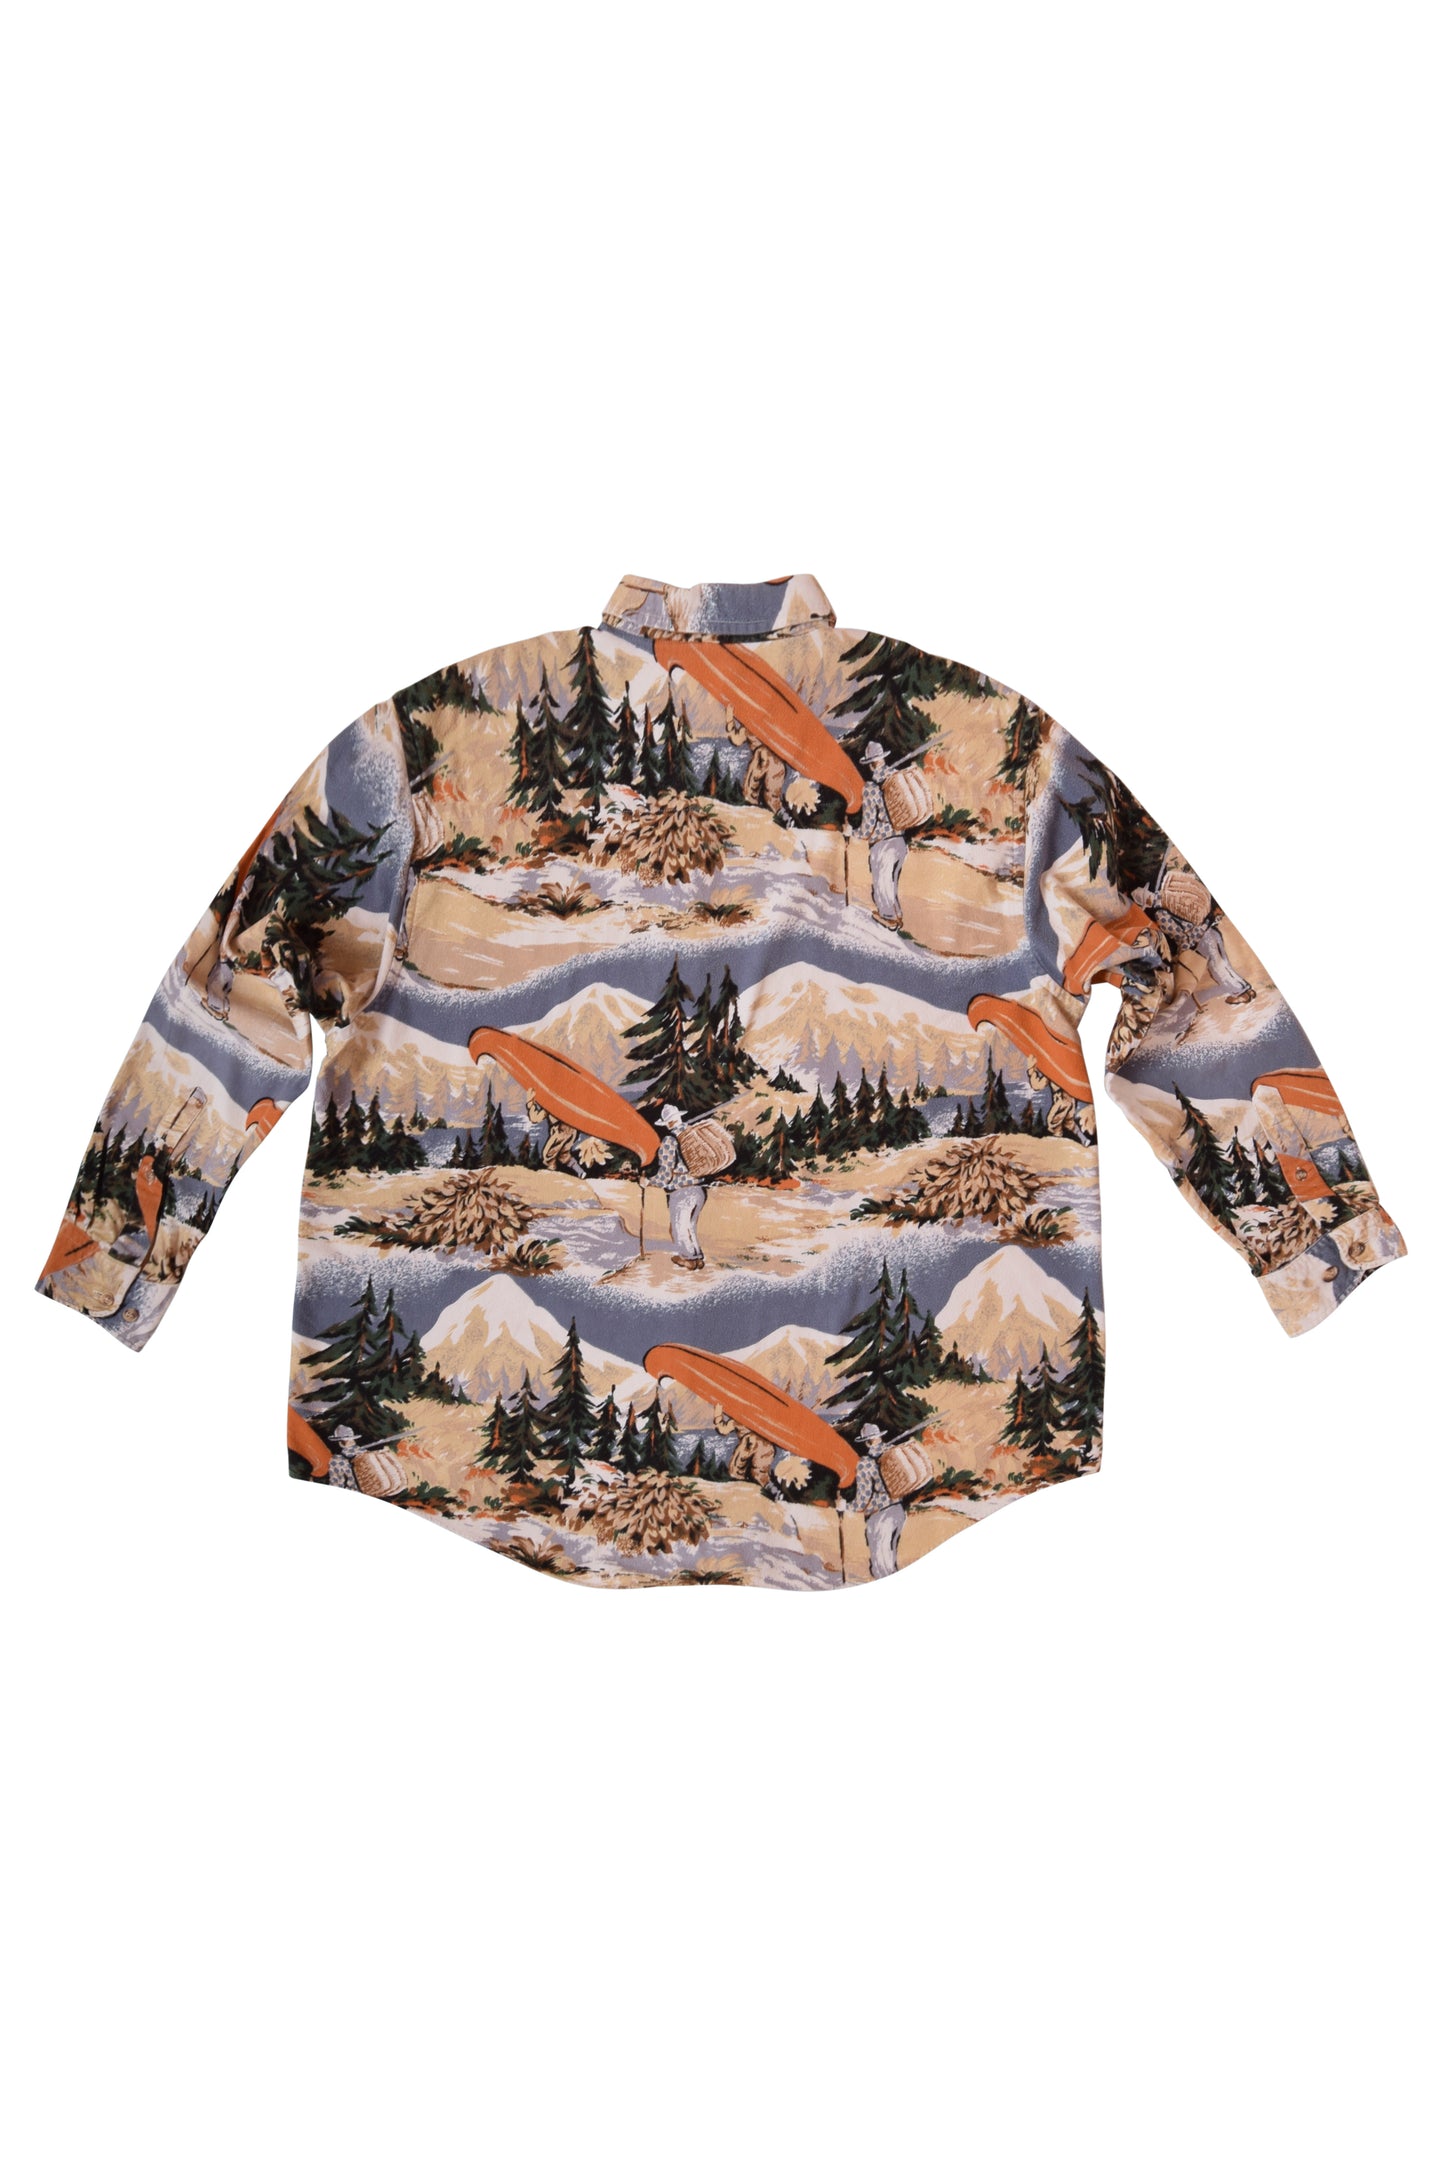 Vintage Shirt with Mountain Pattern Size XL 